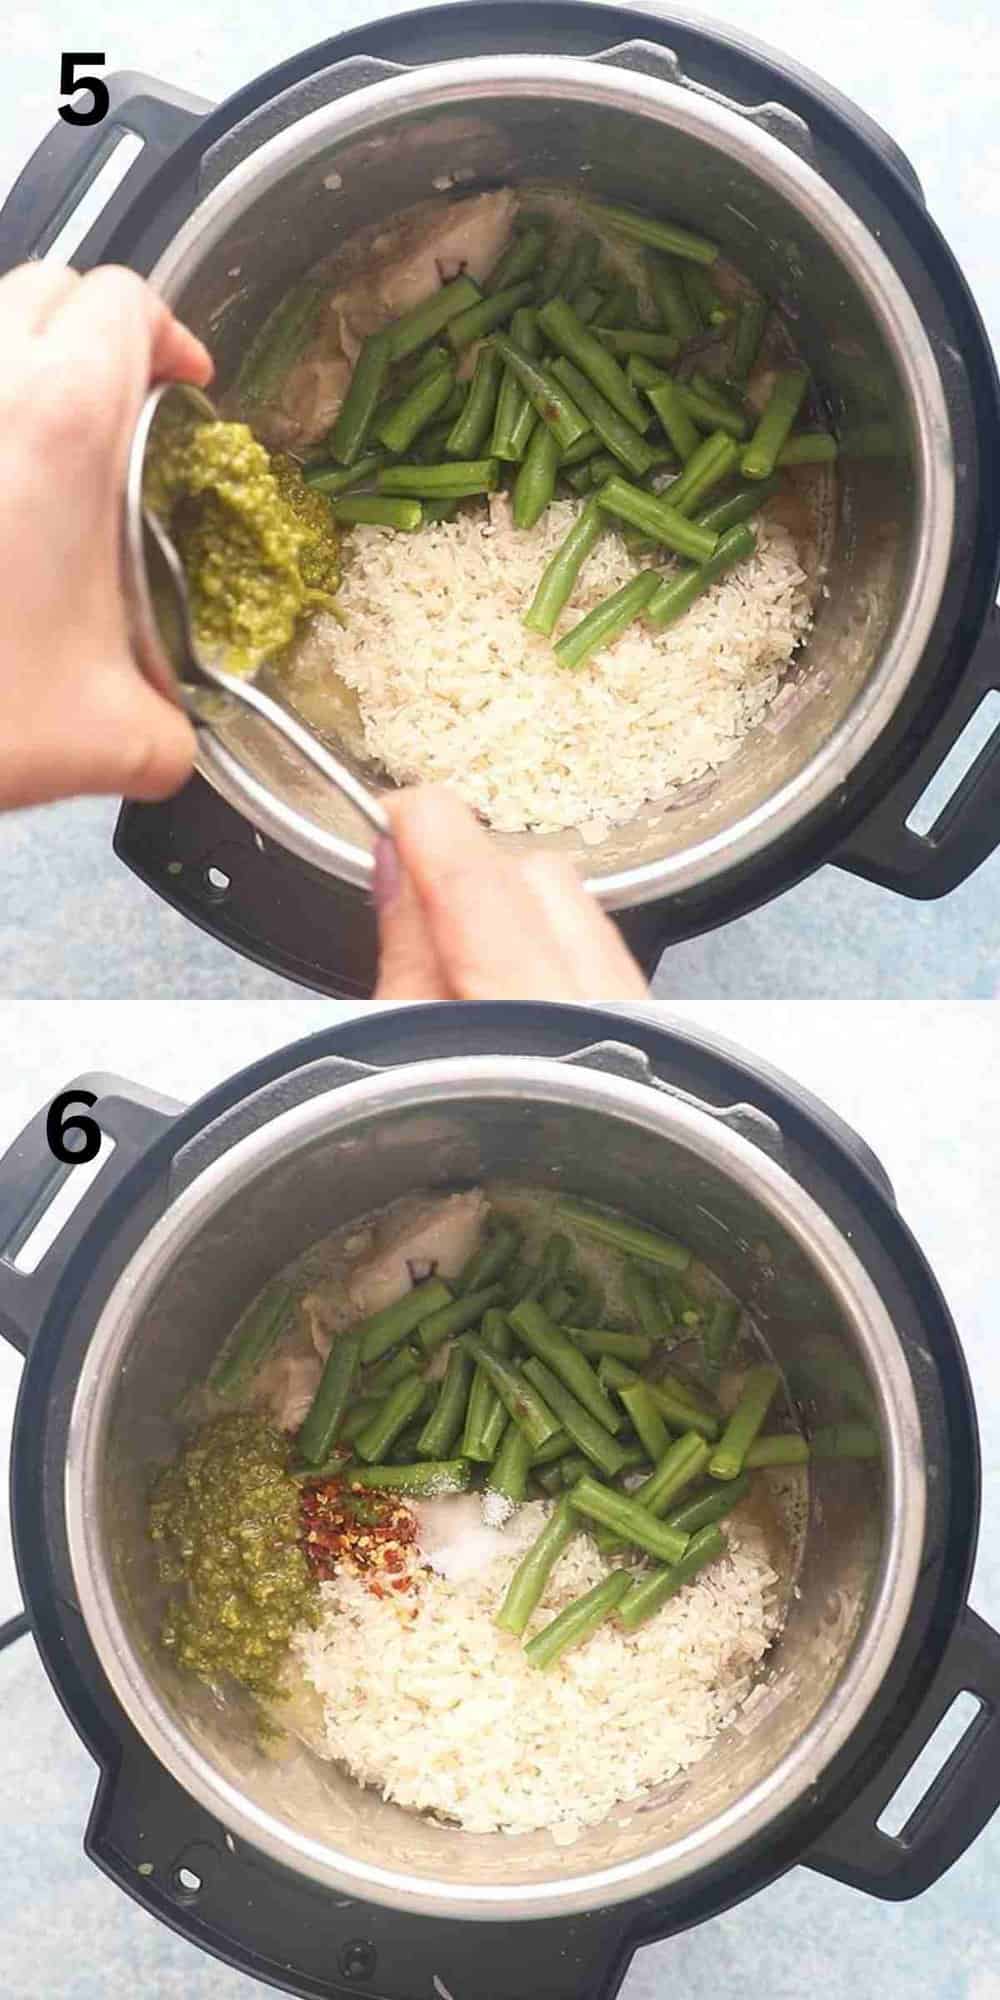 2 photo collage of adding pesto and other ingredients into an instant pot.